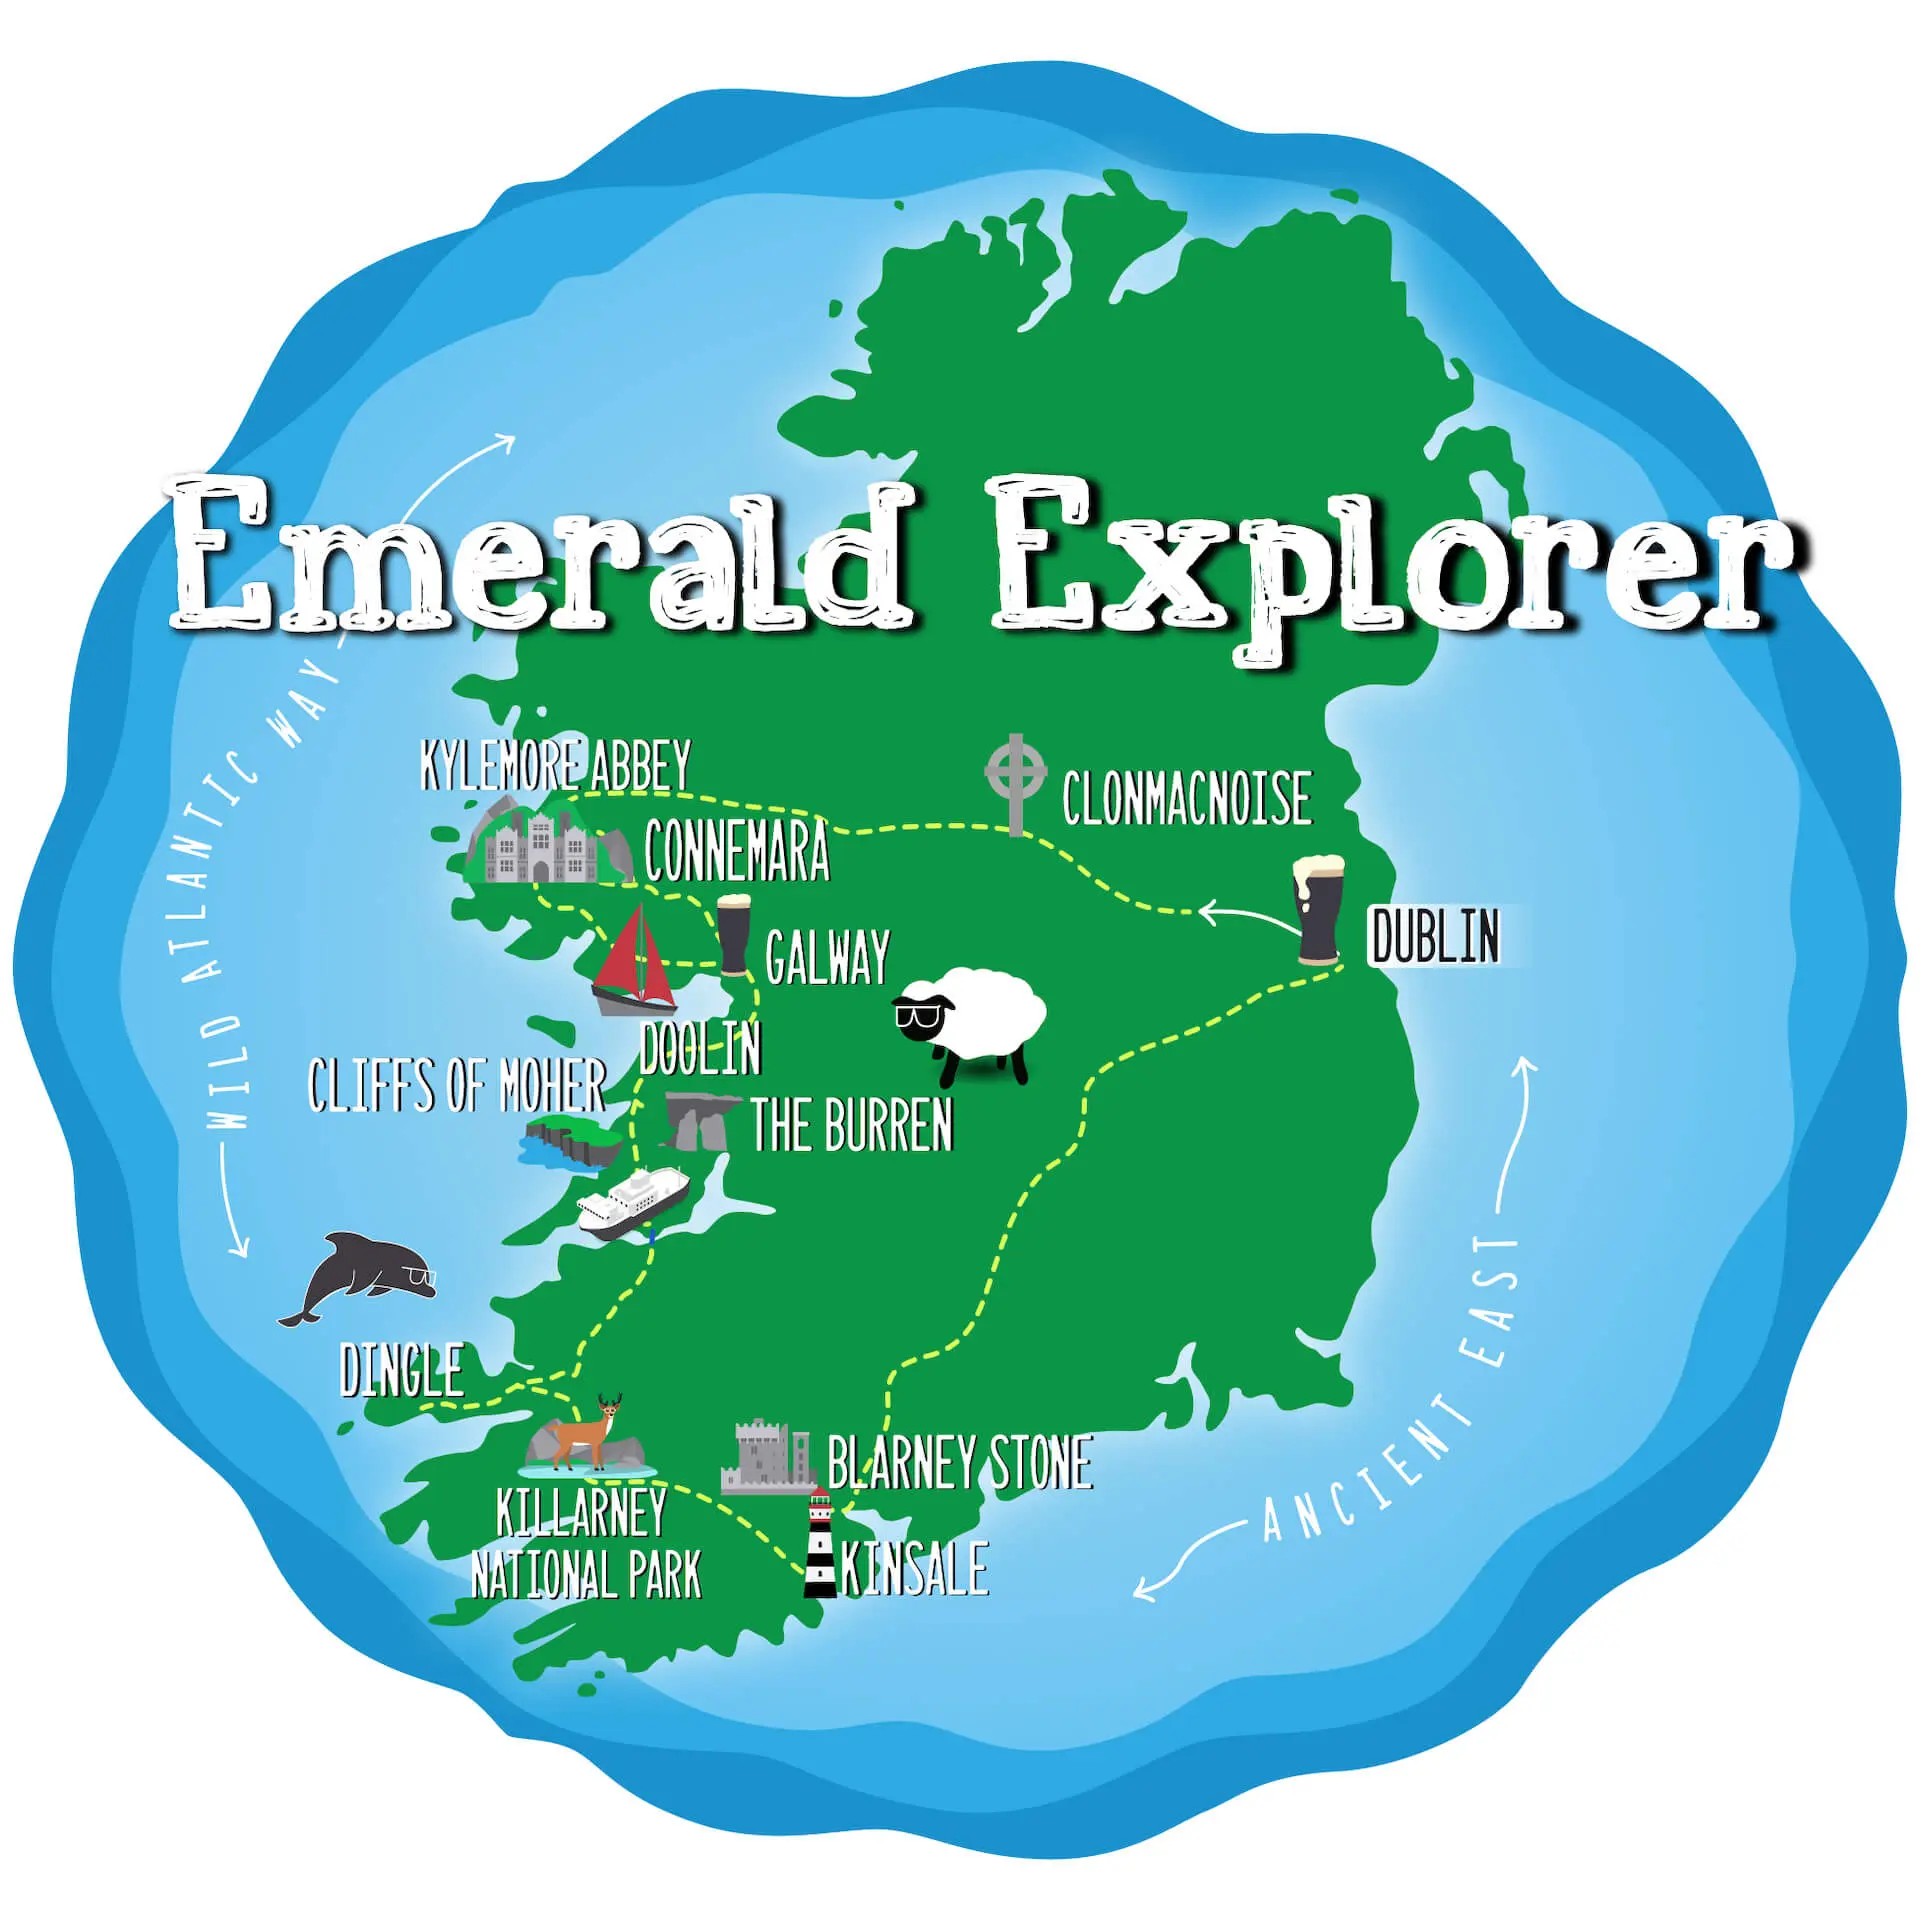 Illustrated map of Ireland highlighting tourist attractions with a theme of "Emerald Explorer" for self-drive tours.